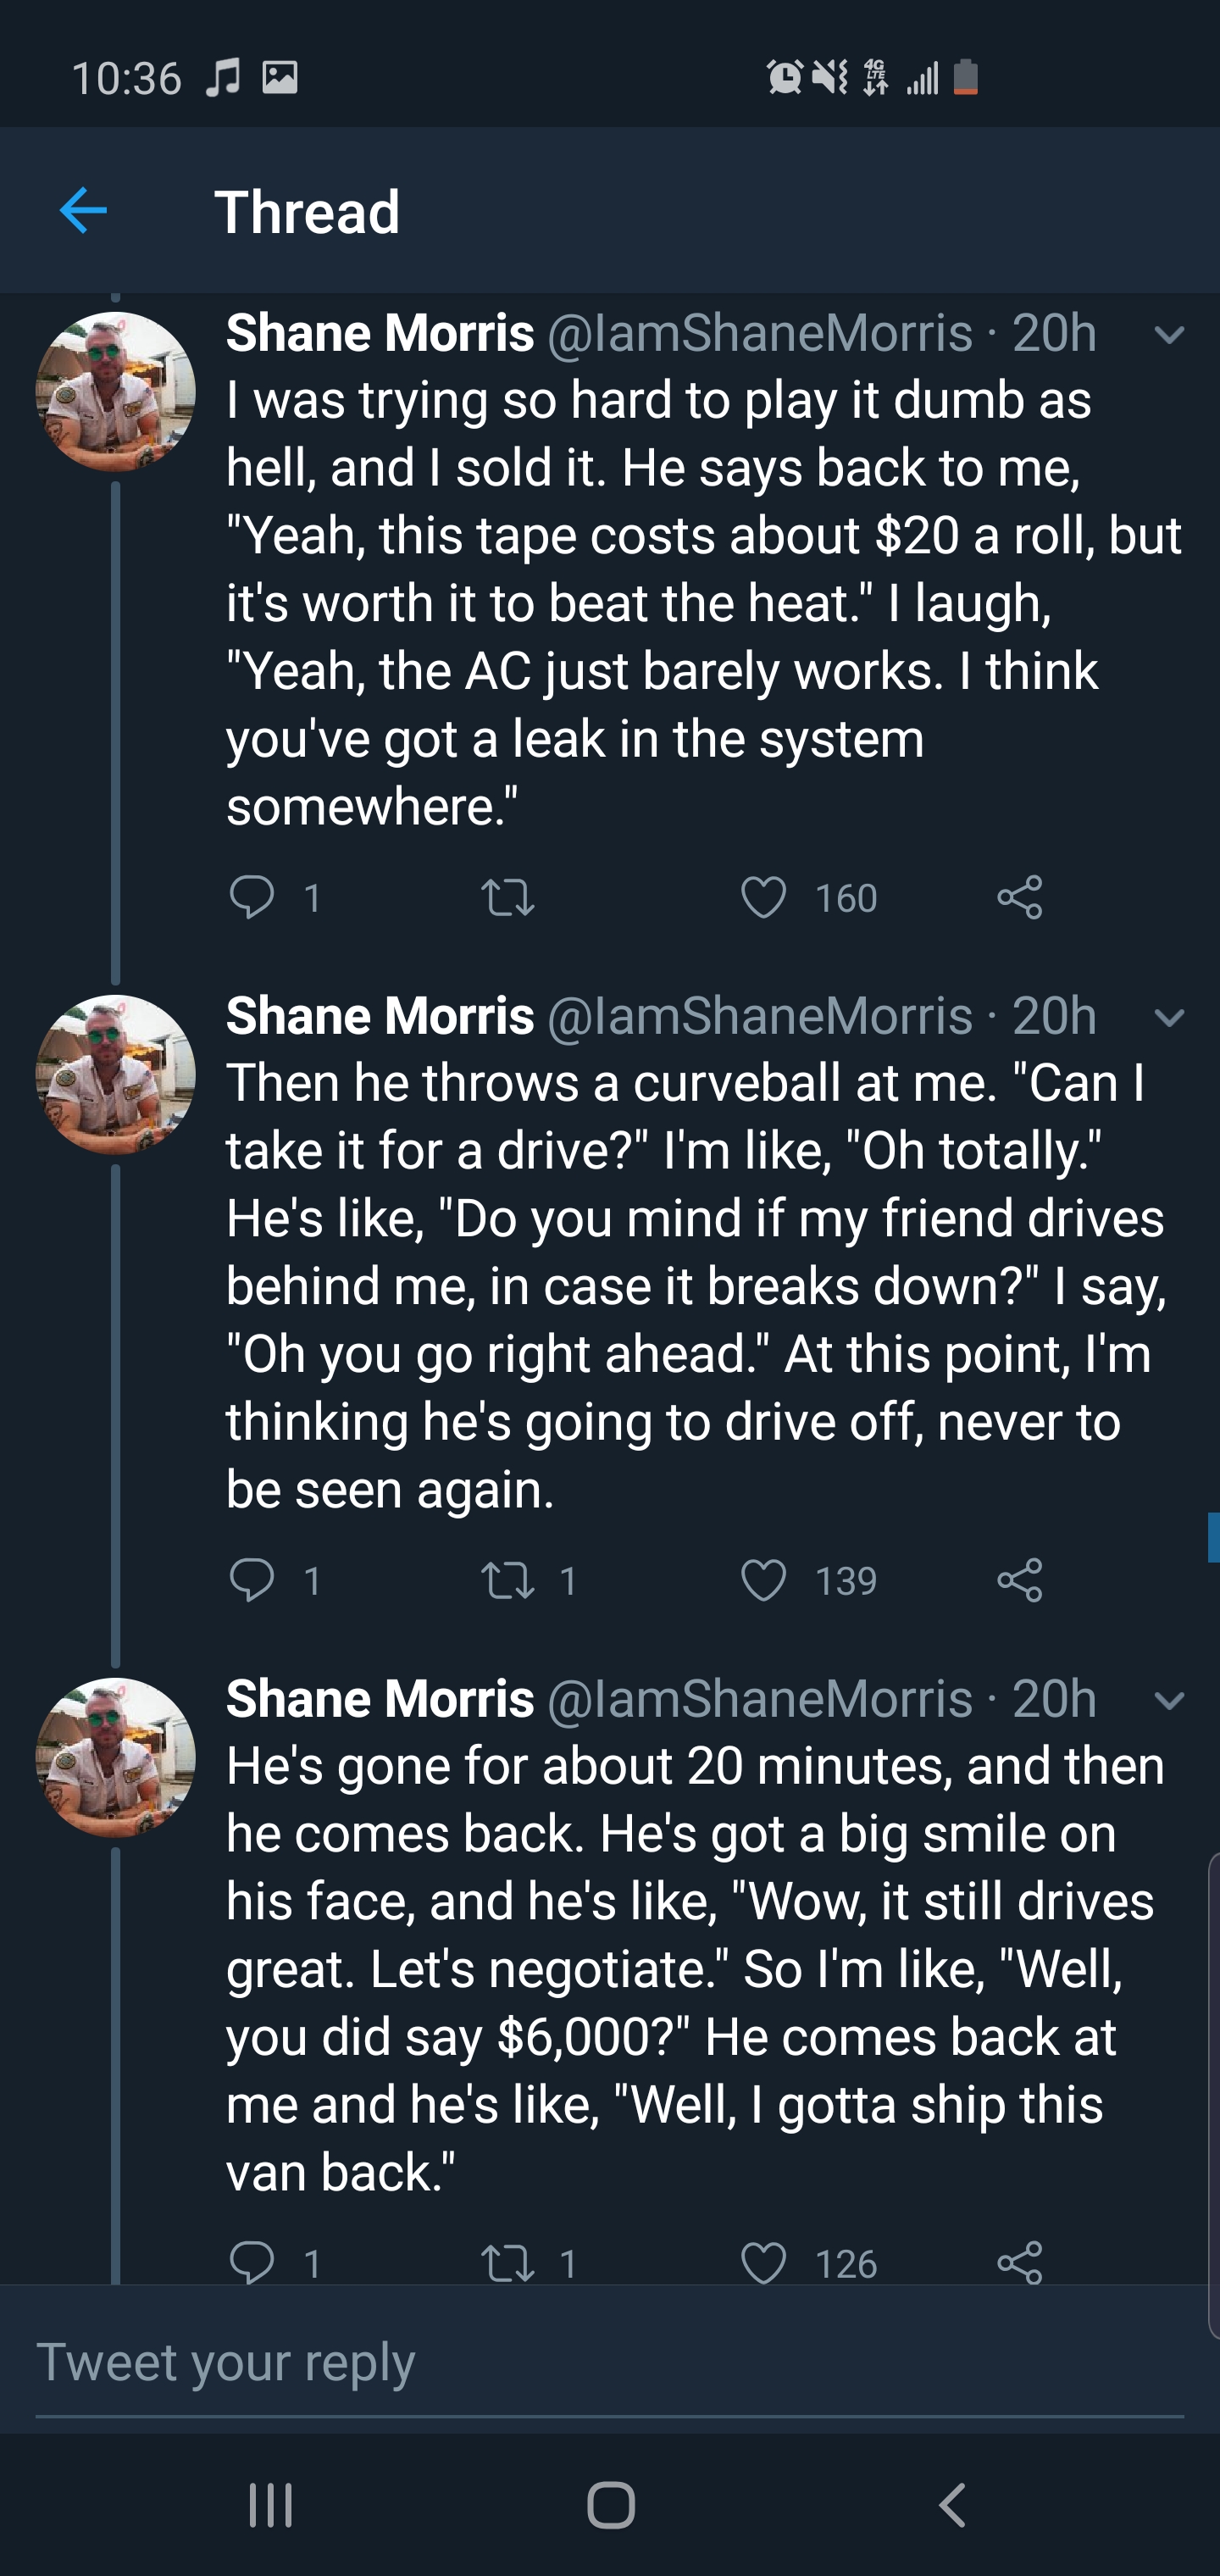 screenshot - 40 Thread Shane Morris 20h I was trying so hard to play it dumb as hell, and I sold it. He says back to me, "Yeah, this tape costs about $20 a roll, but it's worth it to beat the heat" laugh. "Yeah, the Ac just barely works. I think you've go